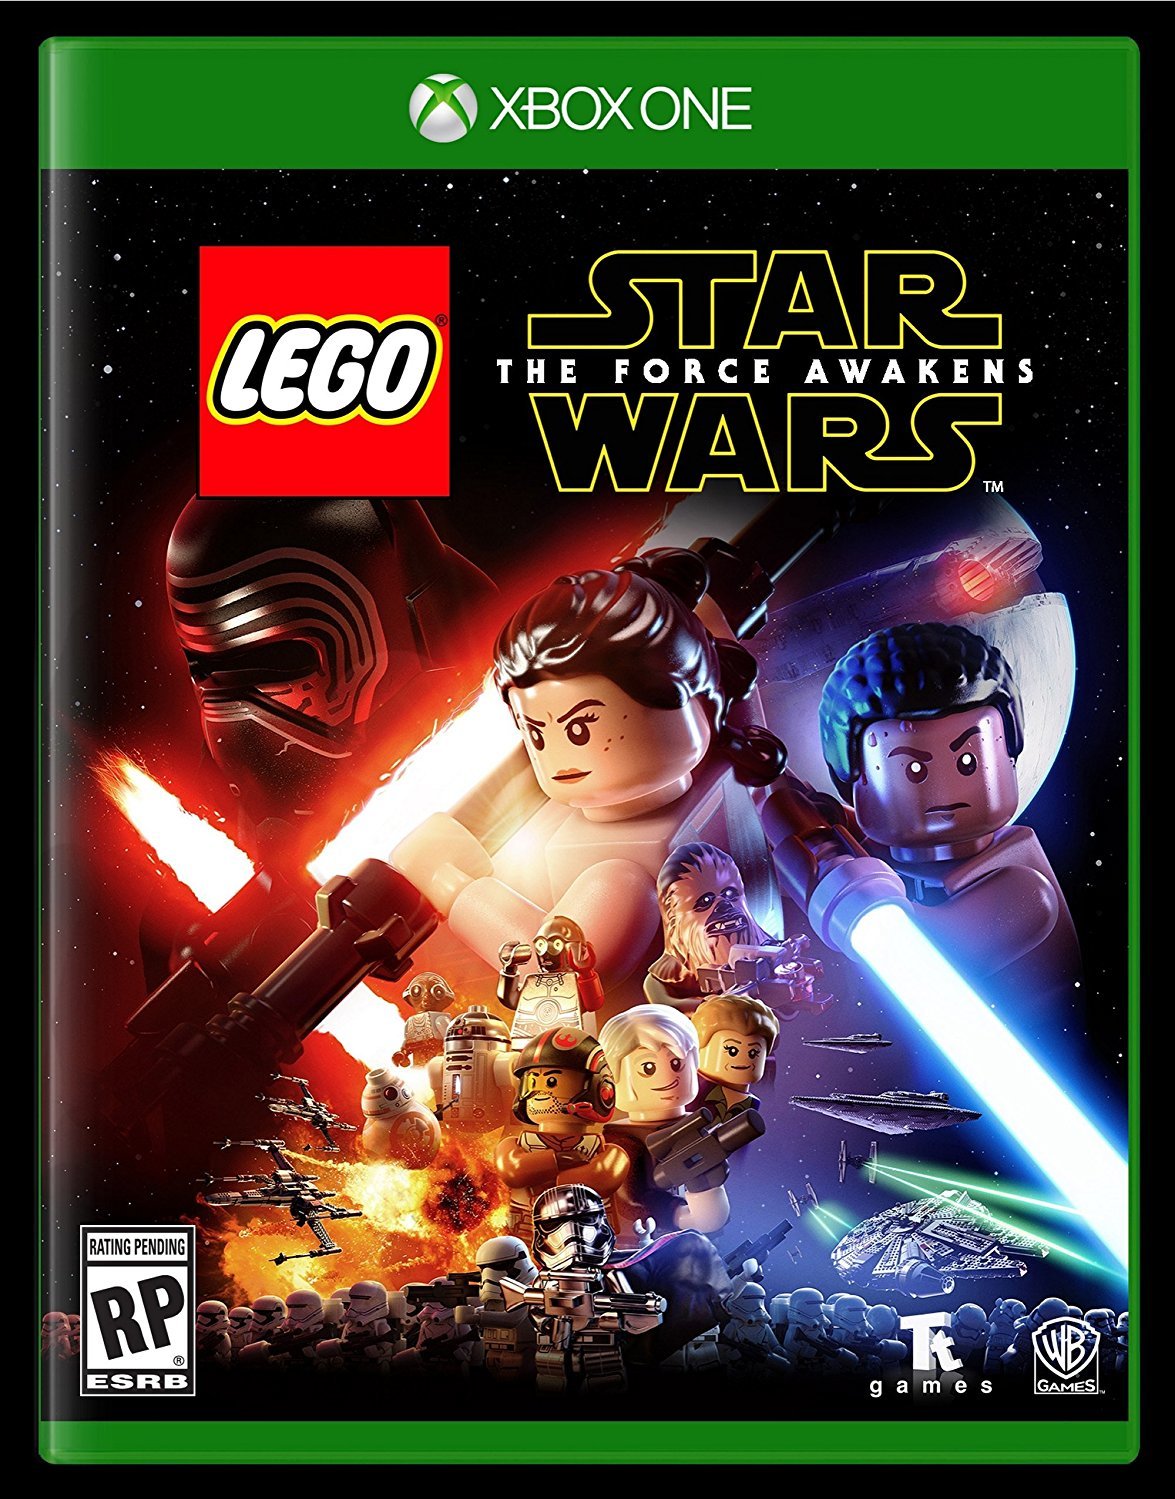 Lego Star Wars: The Force Awakens video game